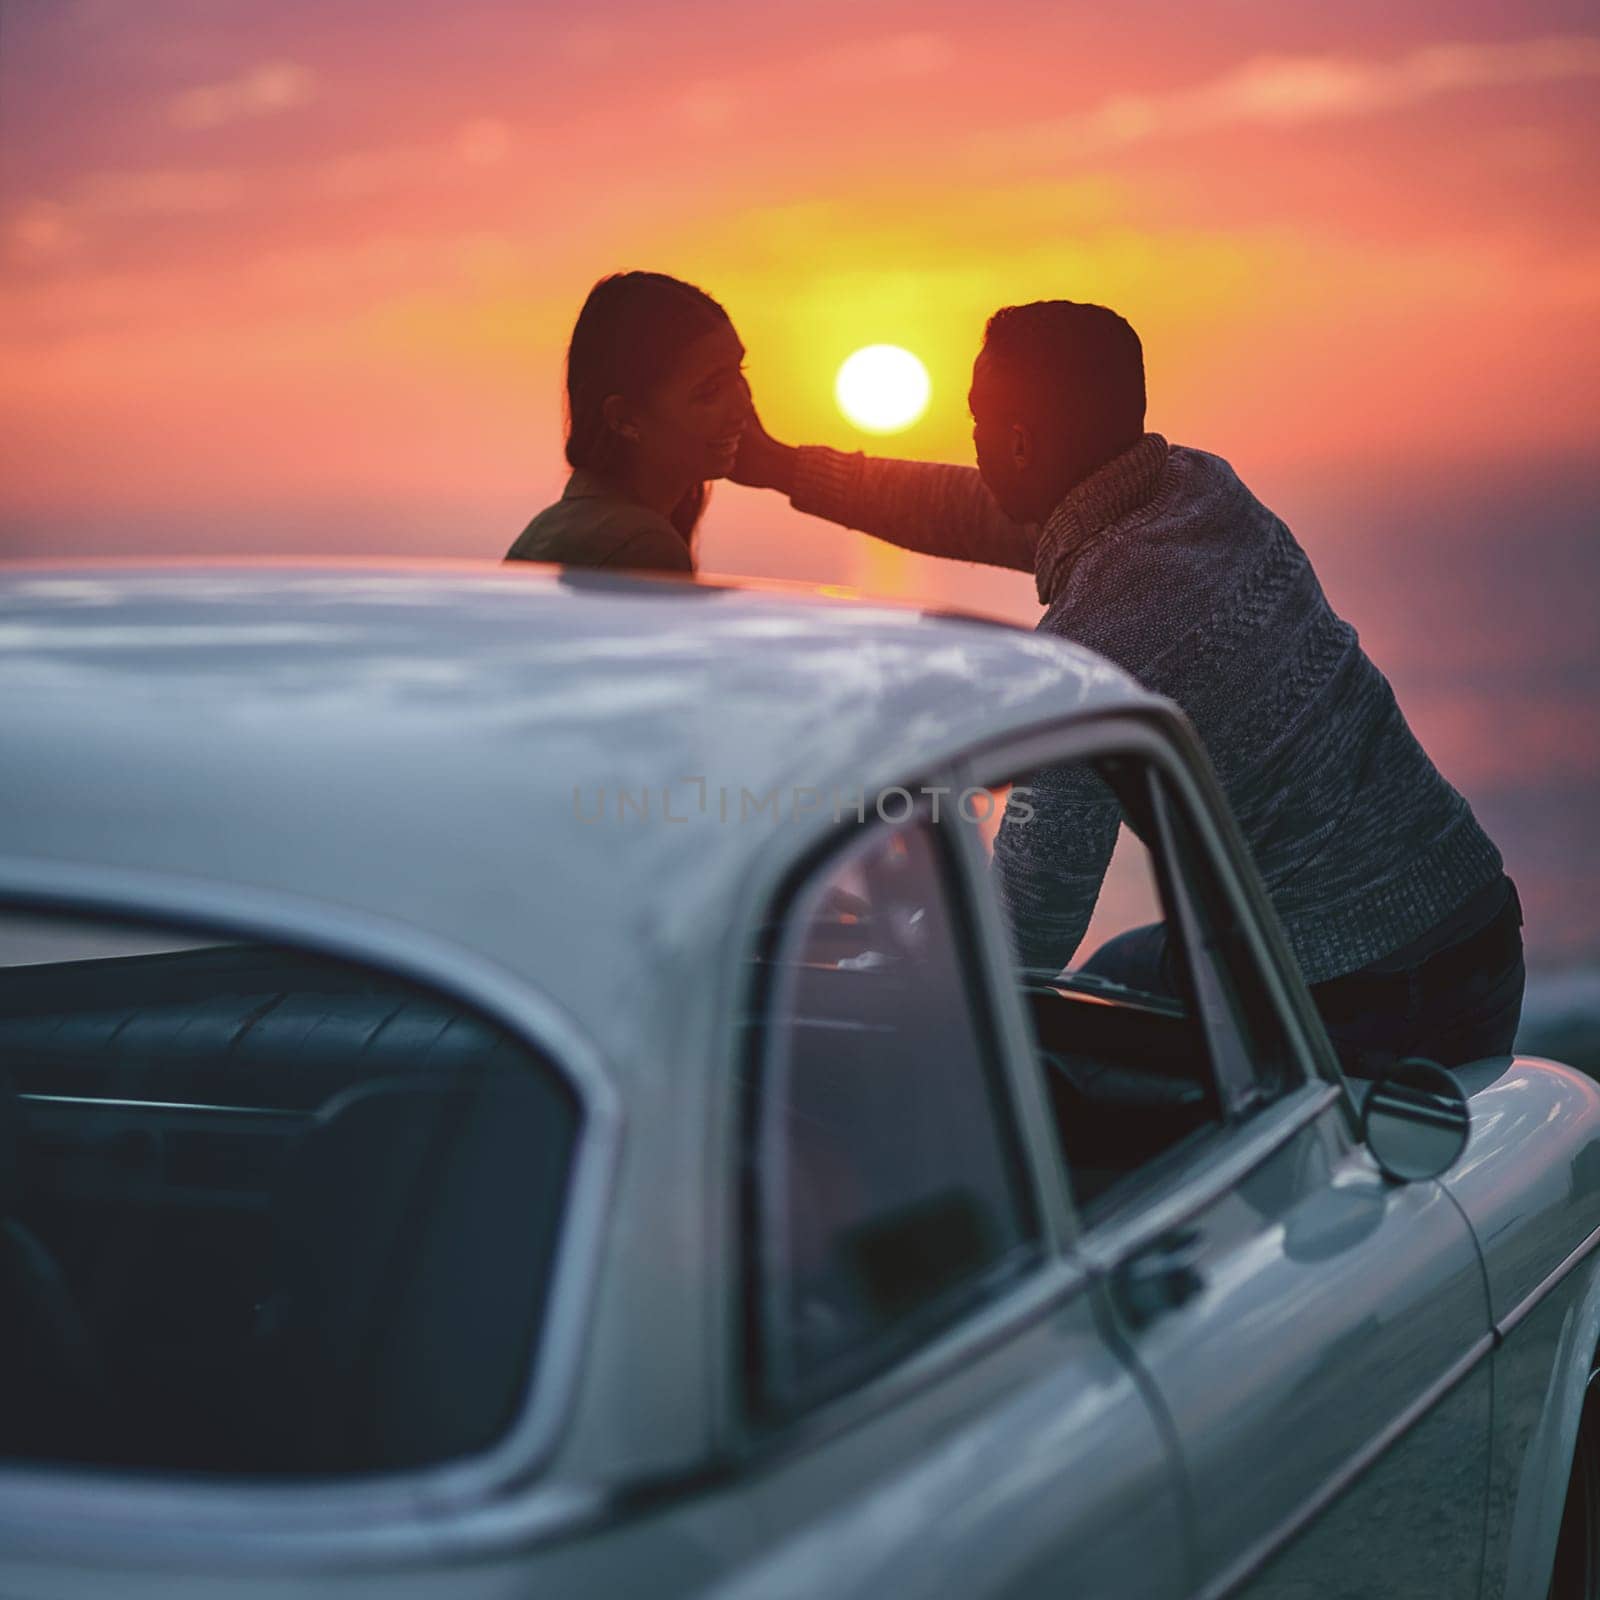 Youre even more beautiful than the sunset. a young couple making a stop at the beach while out on a road trip